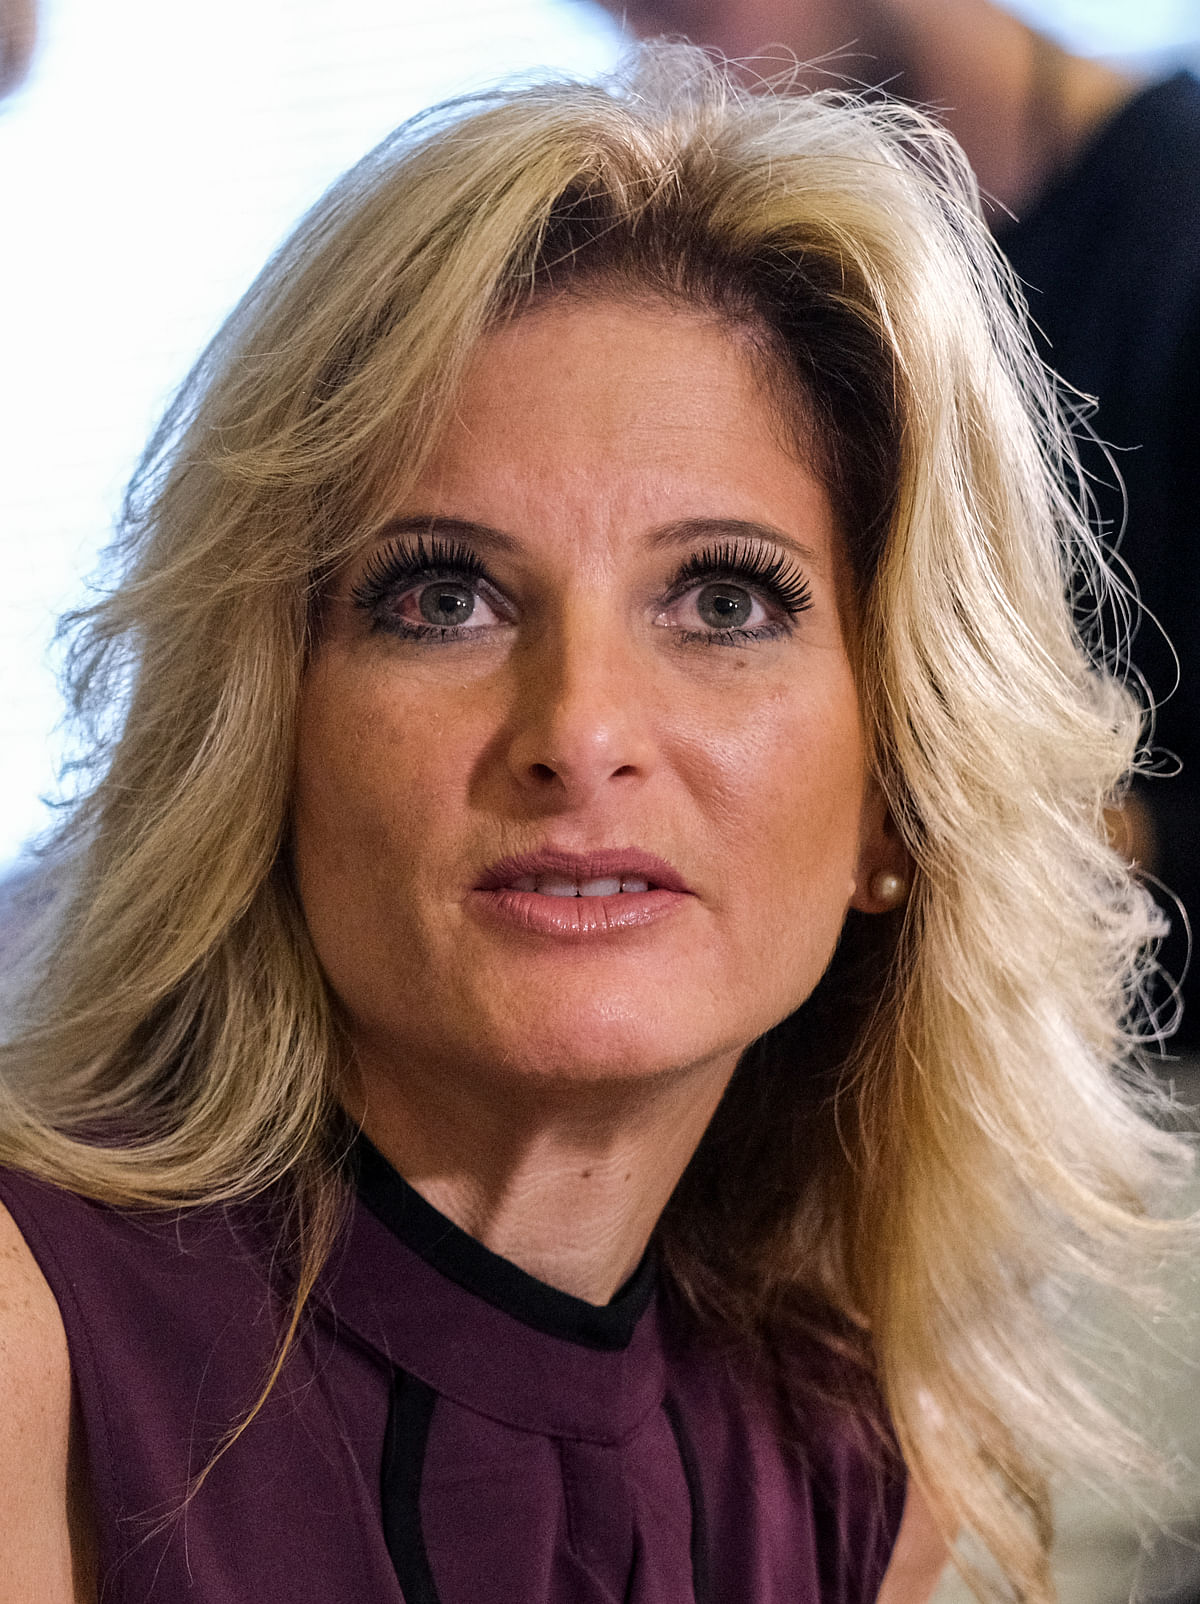  Zervos alleged that the incident took place after she was eliminated from ‘The Apprentice’ show Season 5.